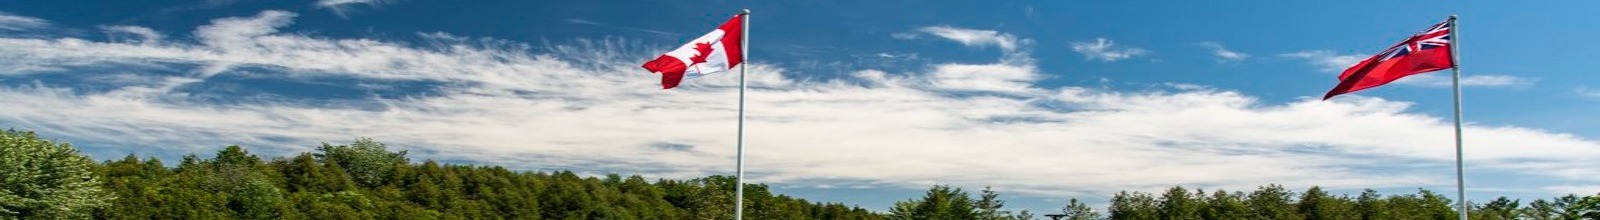 canadian flag and sky